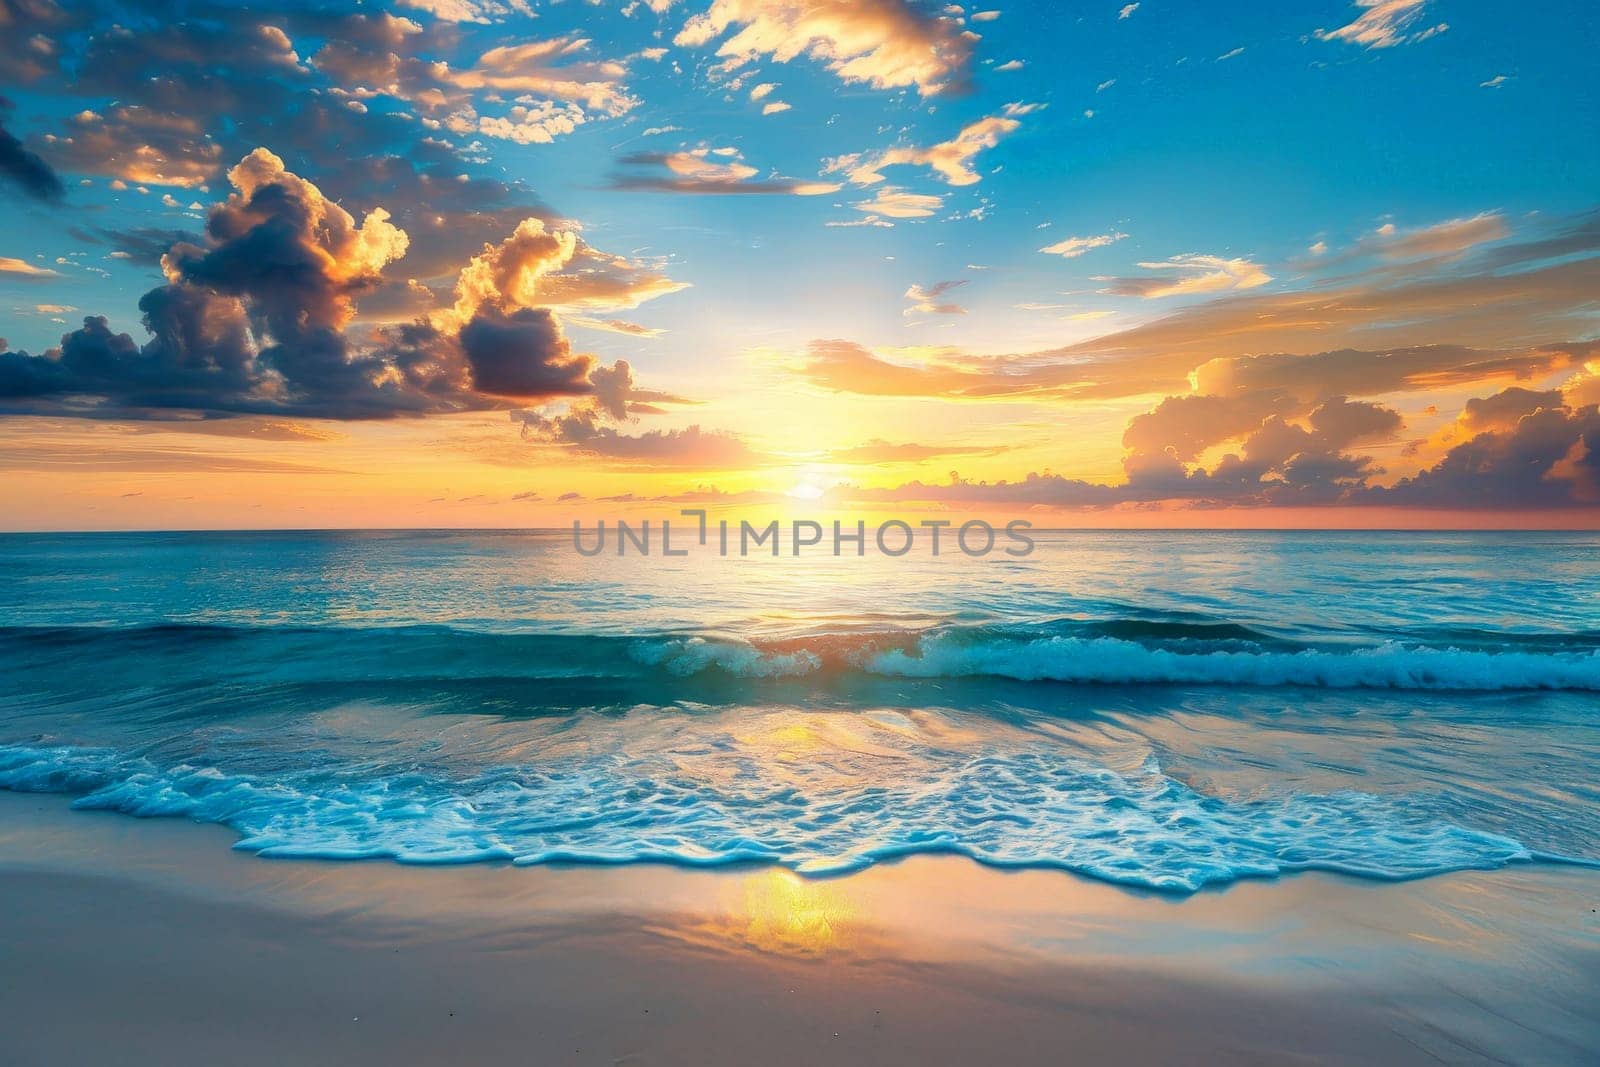 A sunset painting depicts waves crashing on the shore as the sun rises above the horizon by matamnad